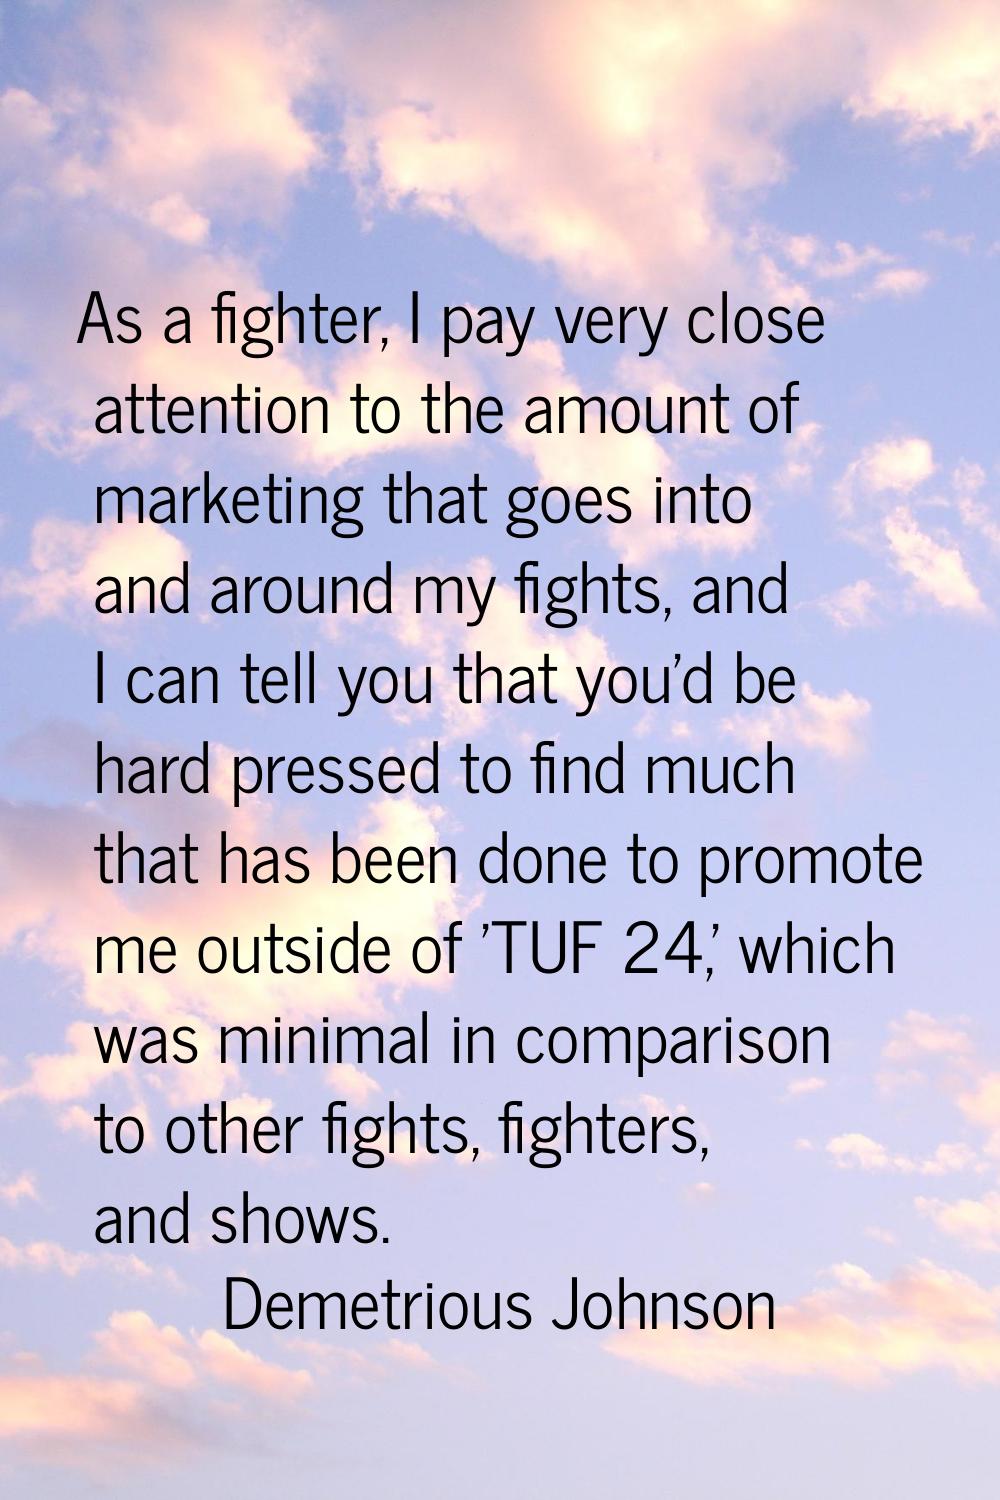 As a fighter, I pay very close attention to the amount of marketing that goes into and around my fi